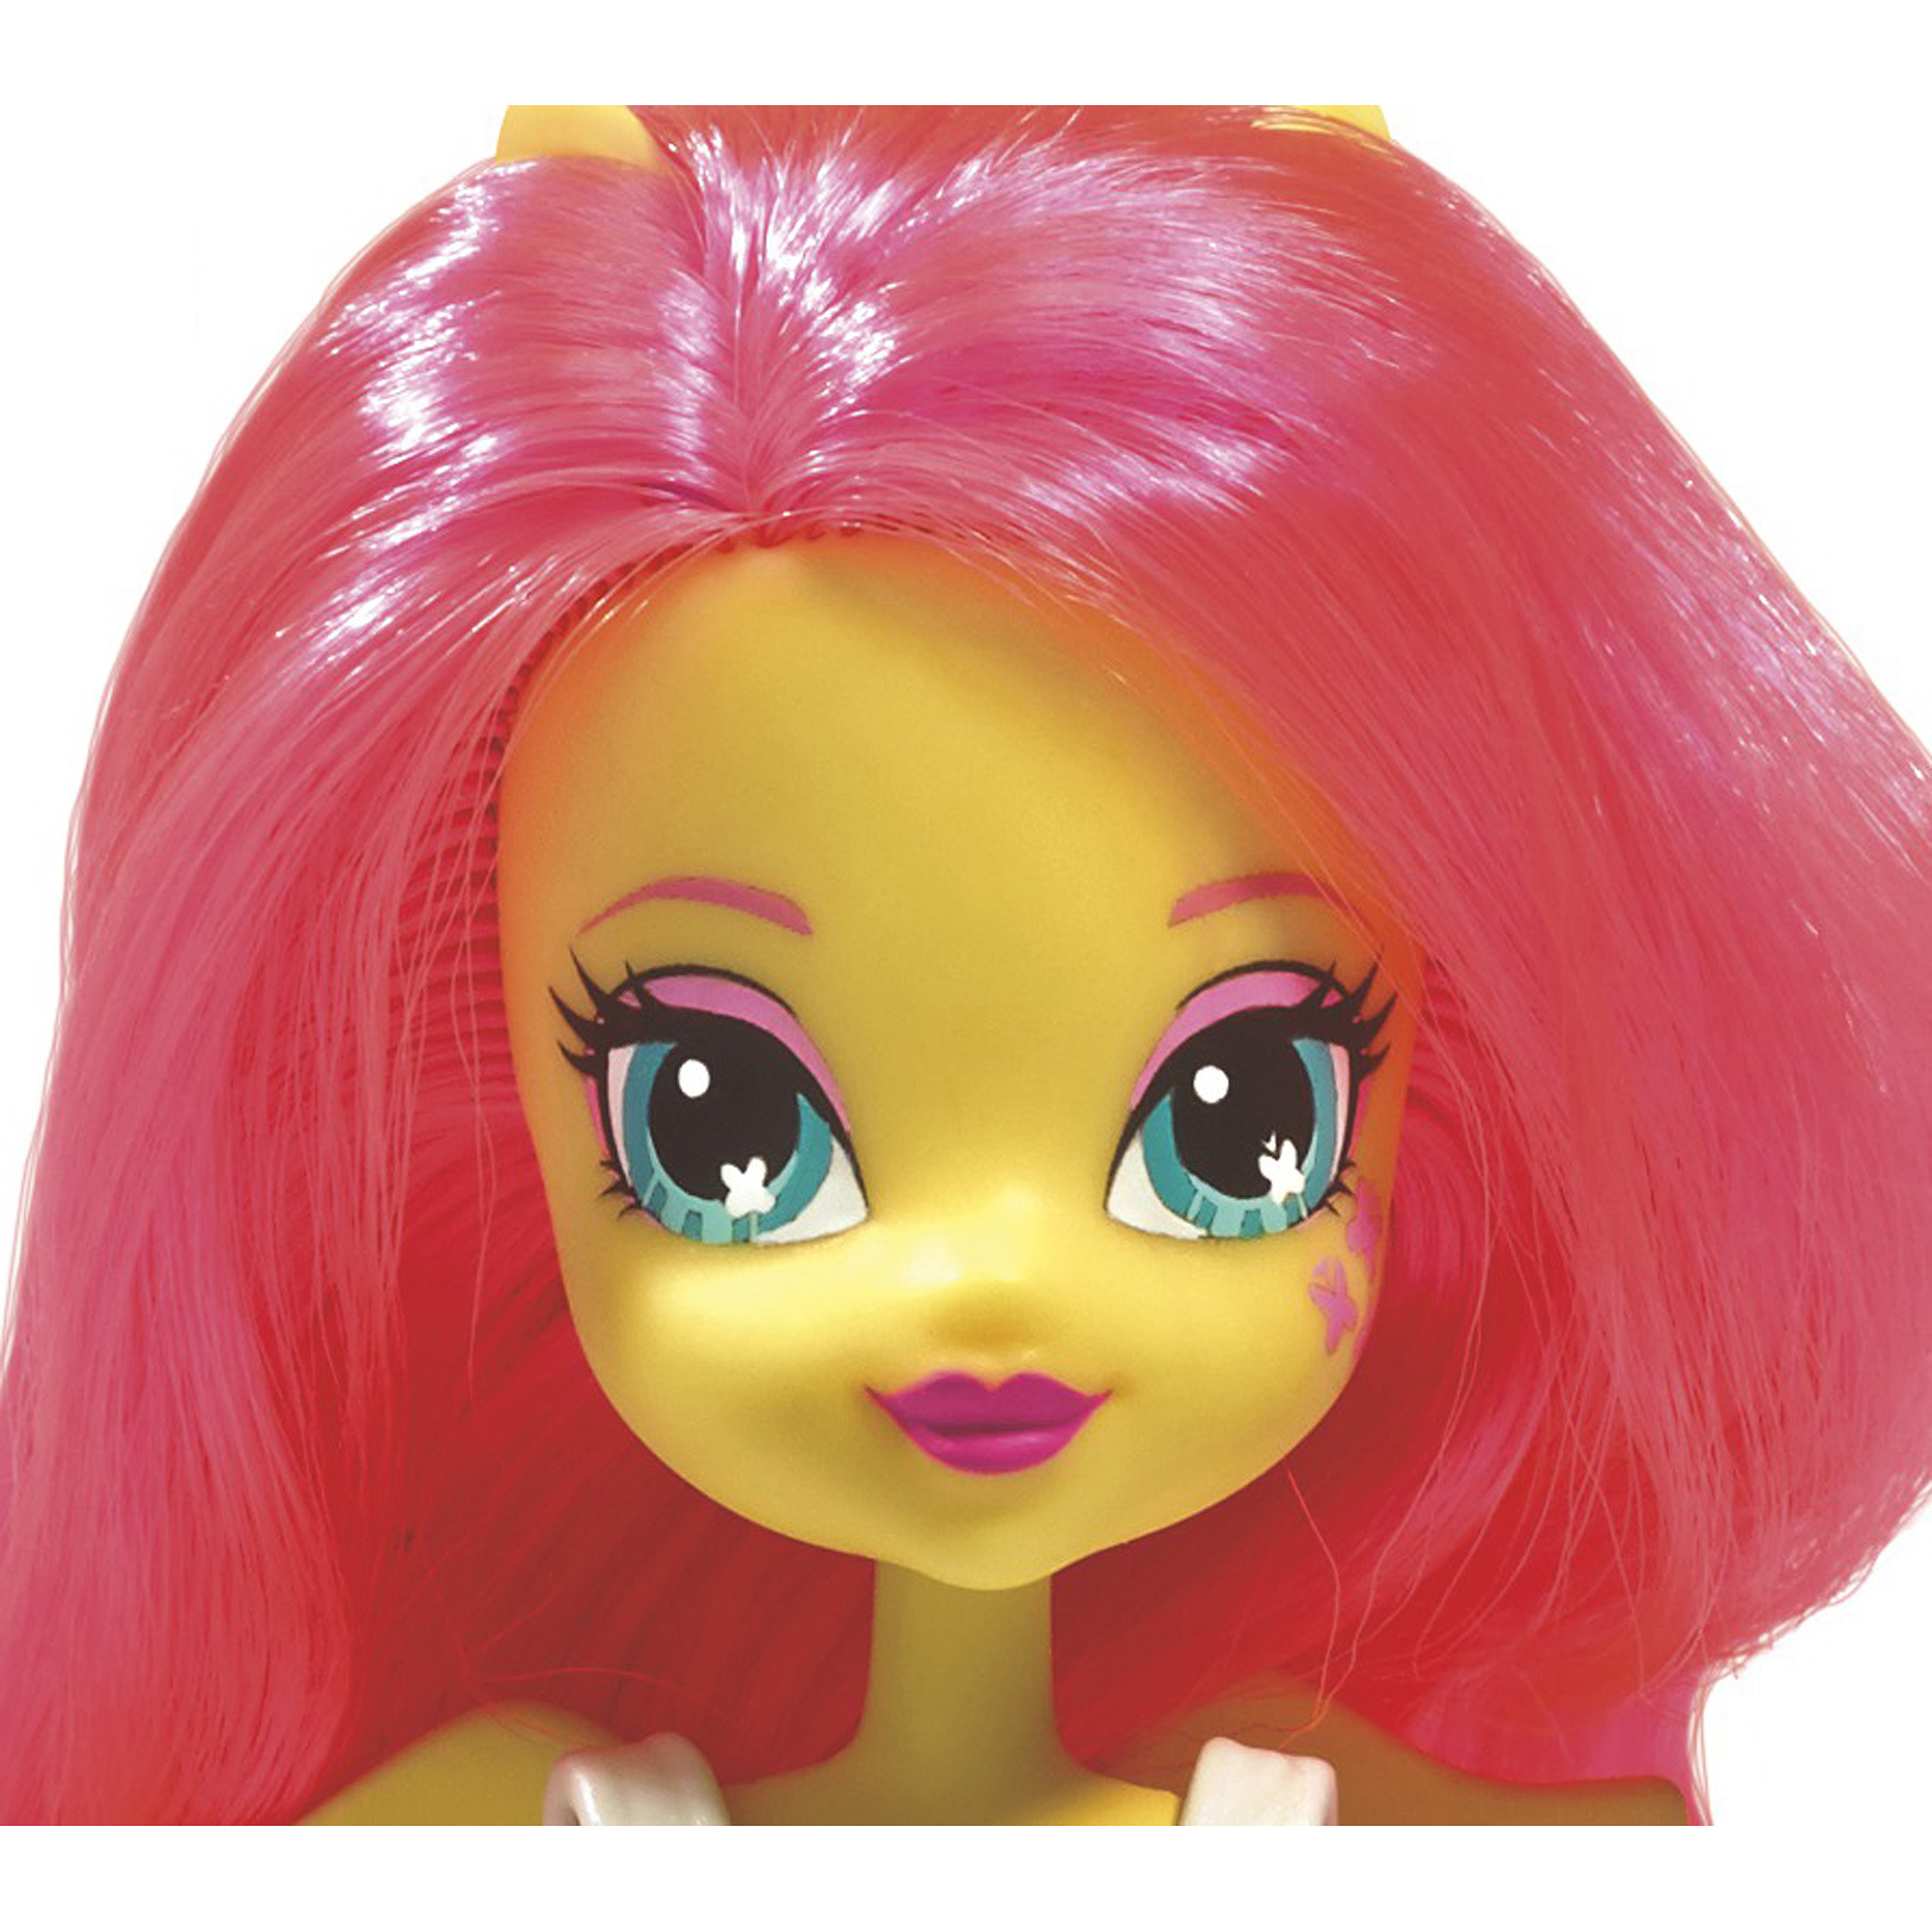 My Little Pony Equestria Girls Collection Fluttershy Doll - image 5 of 6